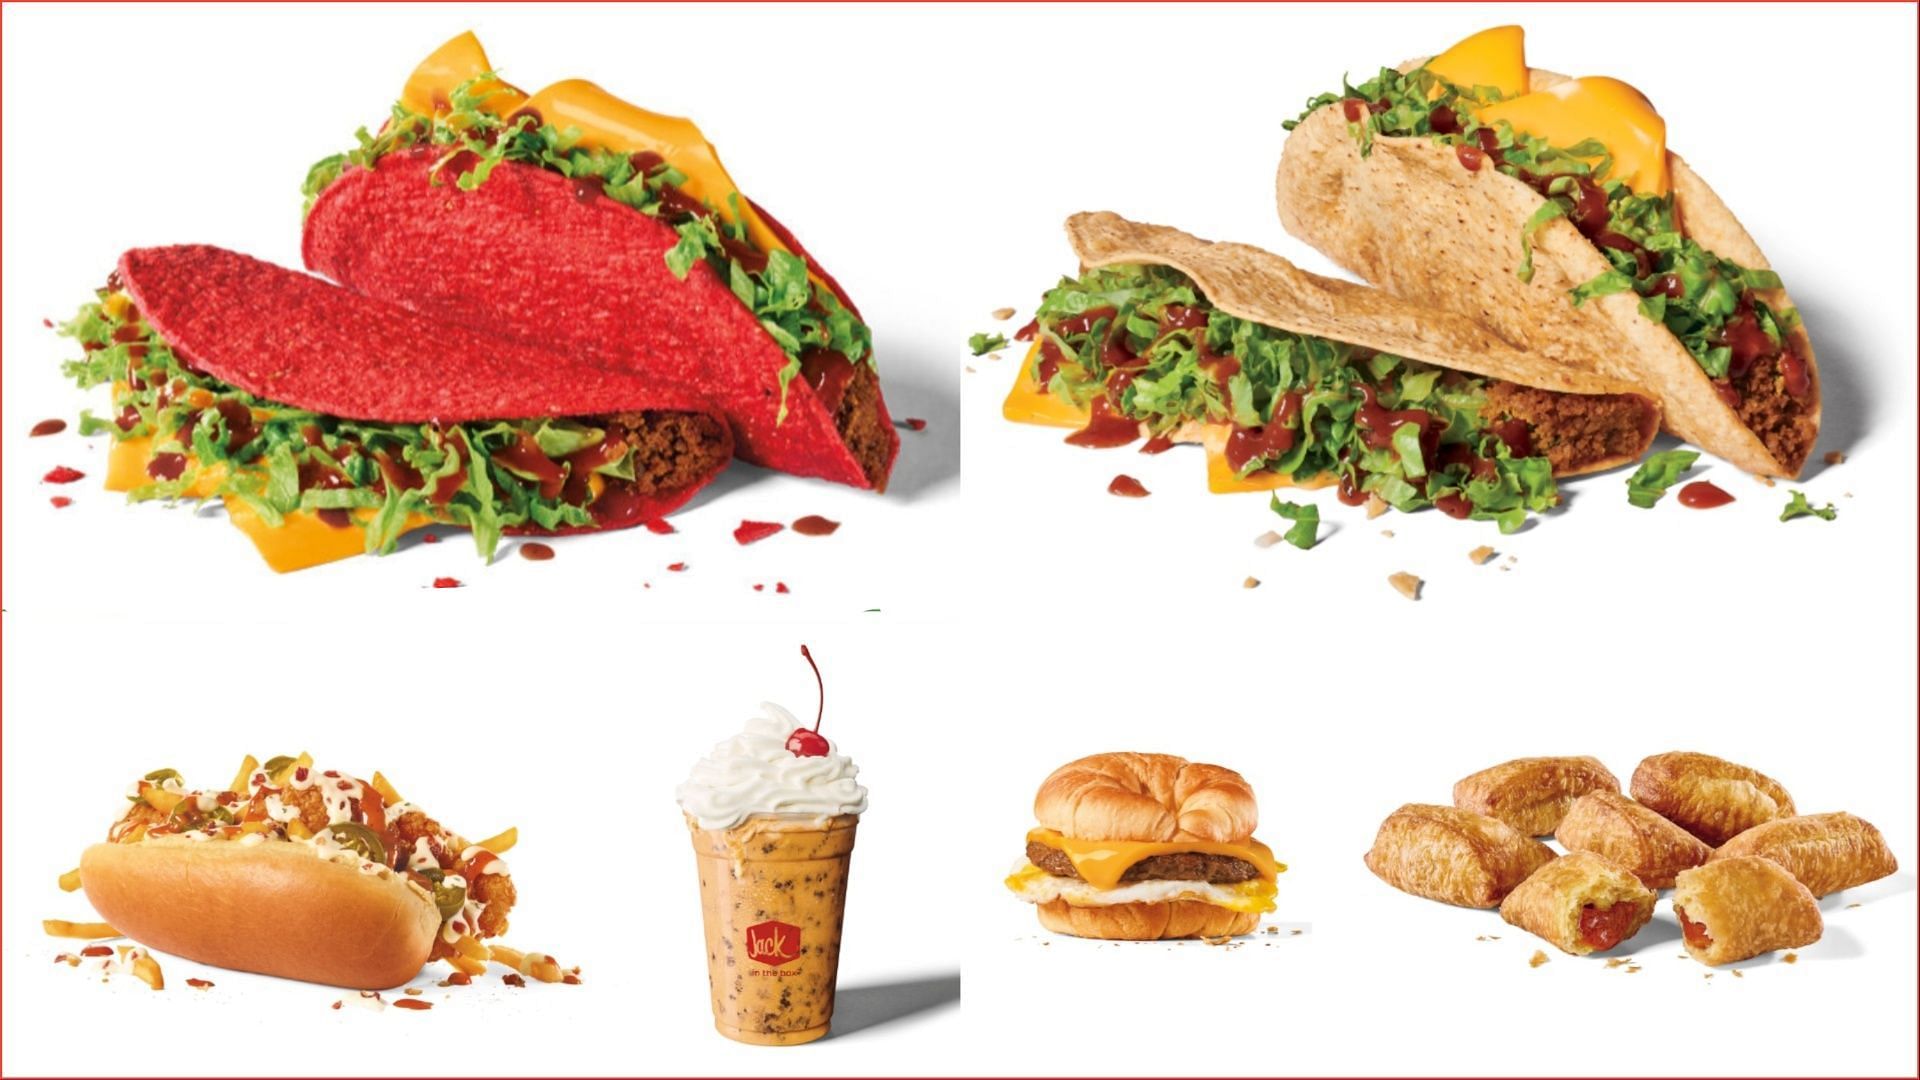 The new Angry Monster Taco hits stores on September 25 (Image via Jack in the Box)